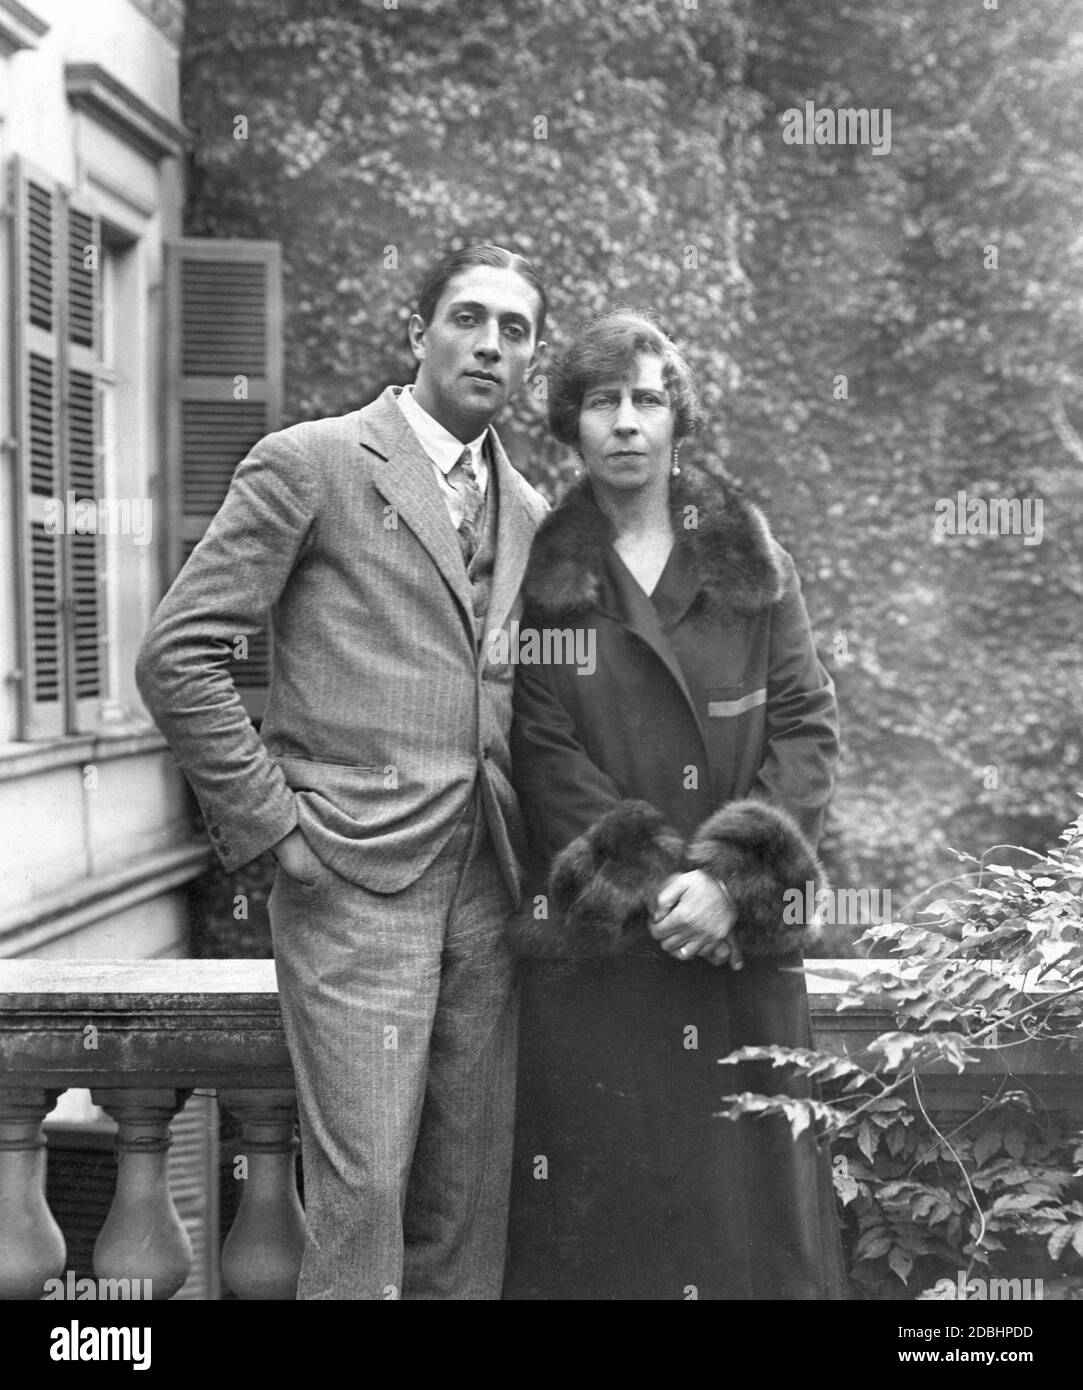 The Zoubkoff couple in Palais Schaumburg in Bonn in 1927. Alexander Zoubkoff was a Russian emigrant who was married for a few months to Viktoria (nee Princess of Prussia, sister of Wilhelm II and in his first marriage wife of Adolf of Schaumburg-Lippe). They lived together in the palace. Stock Photo